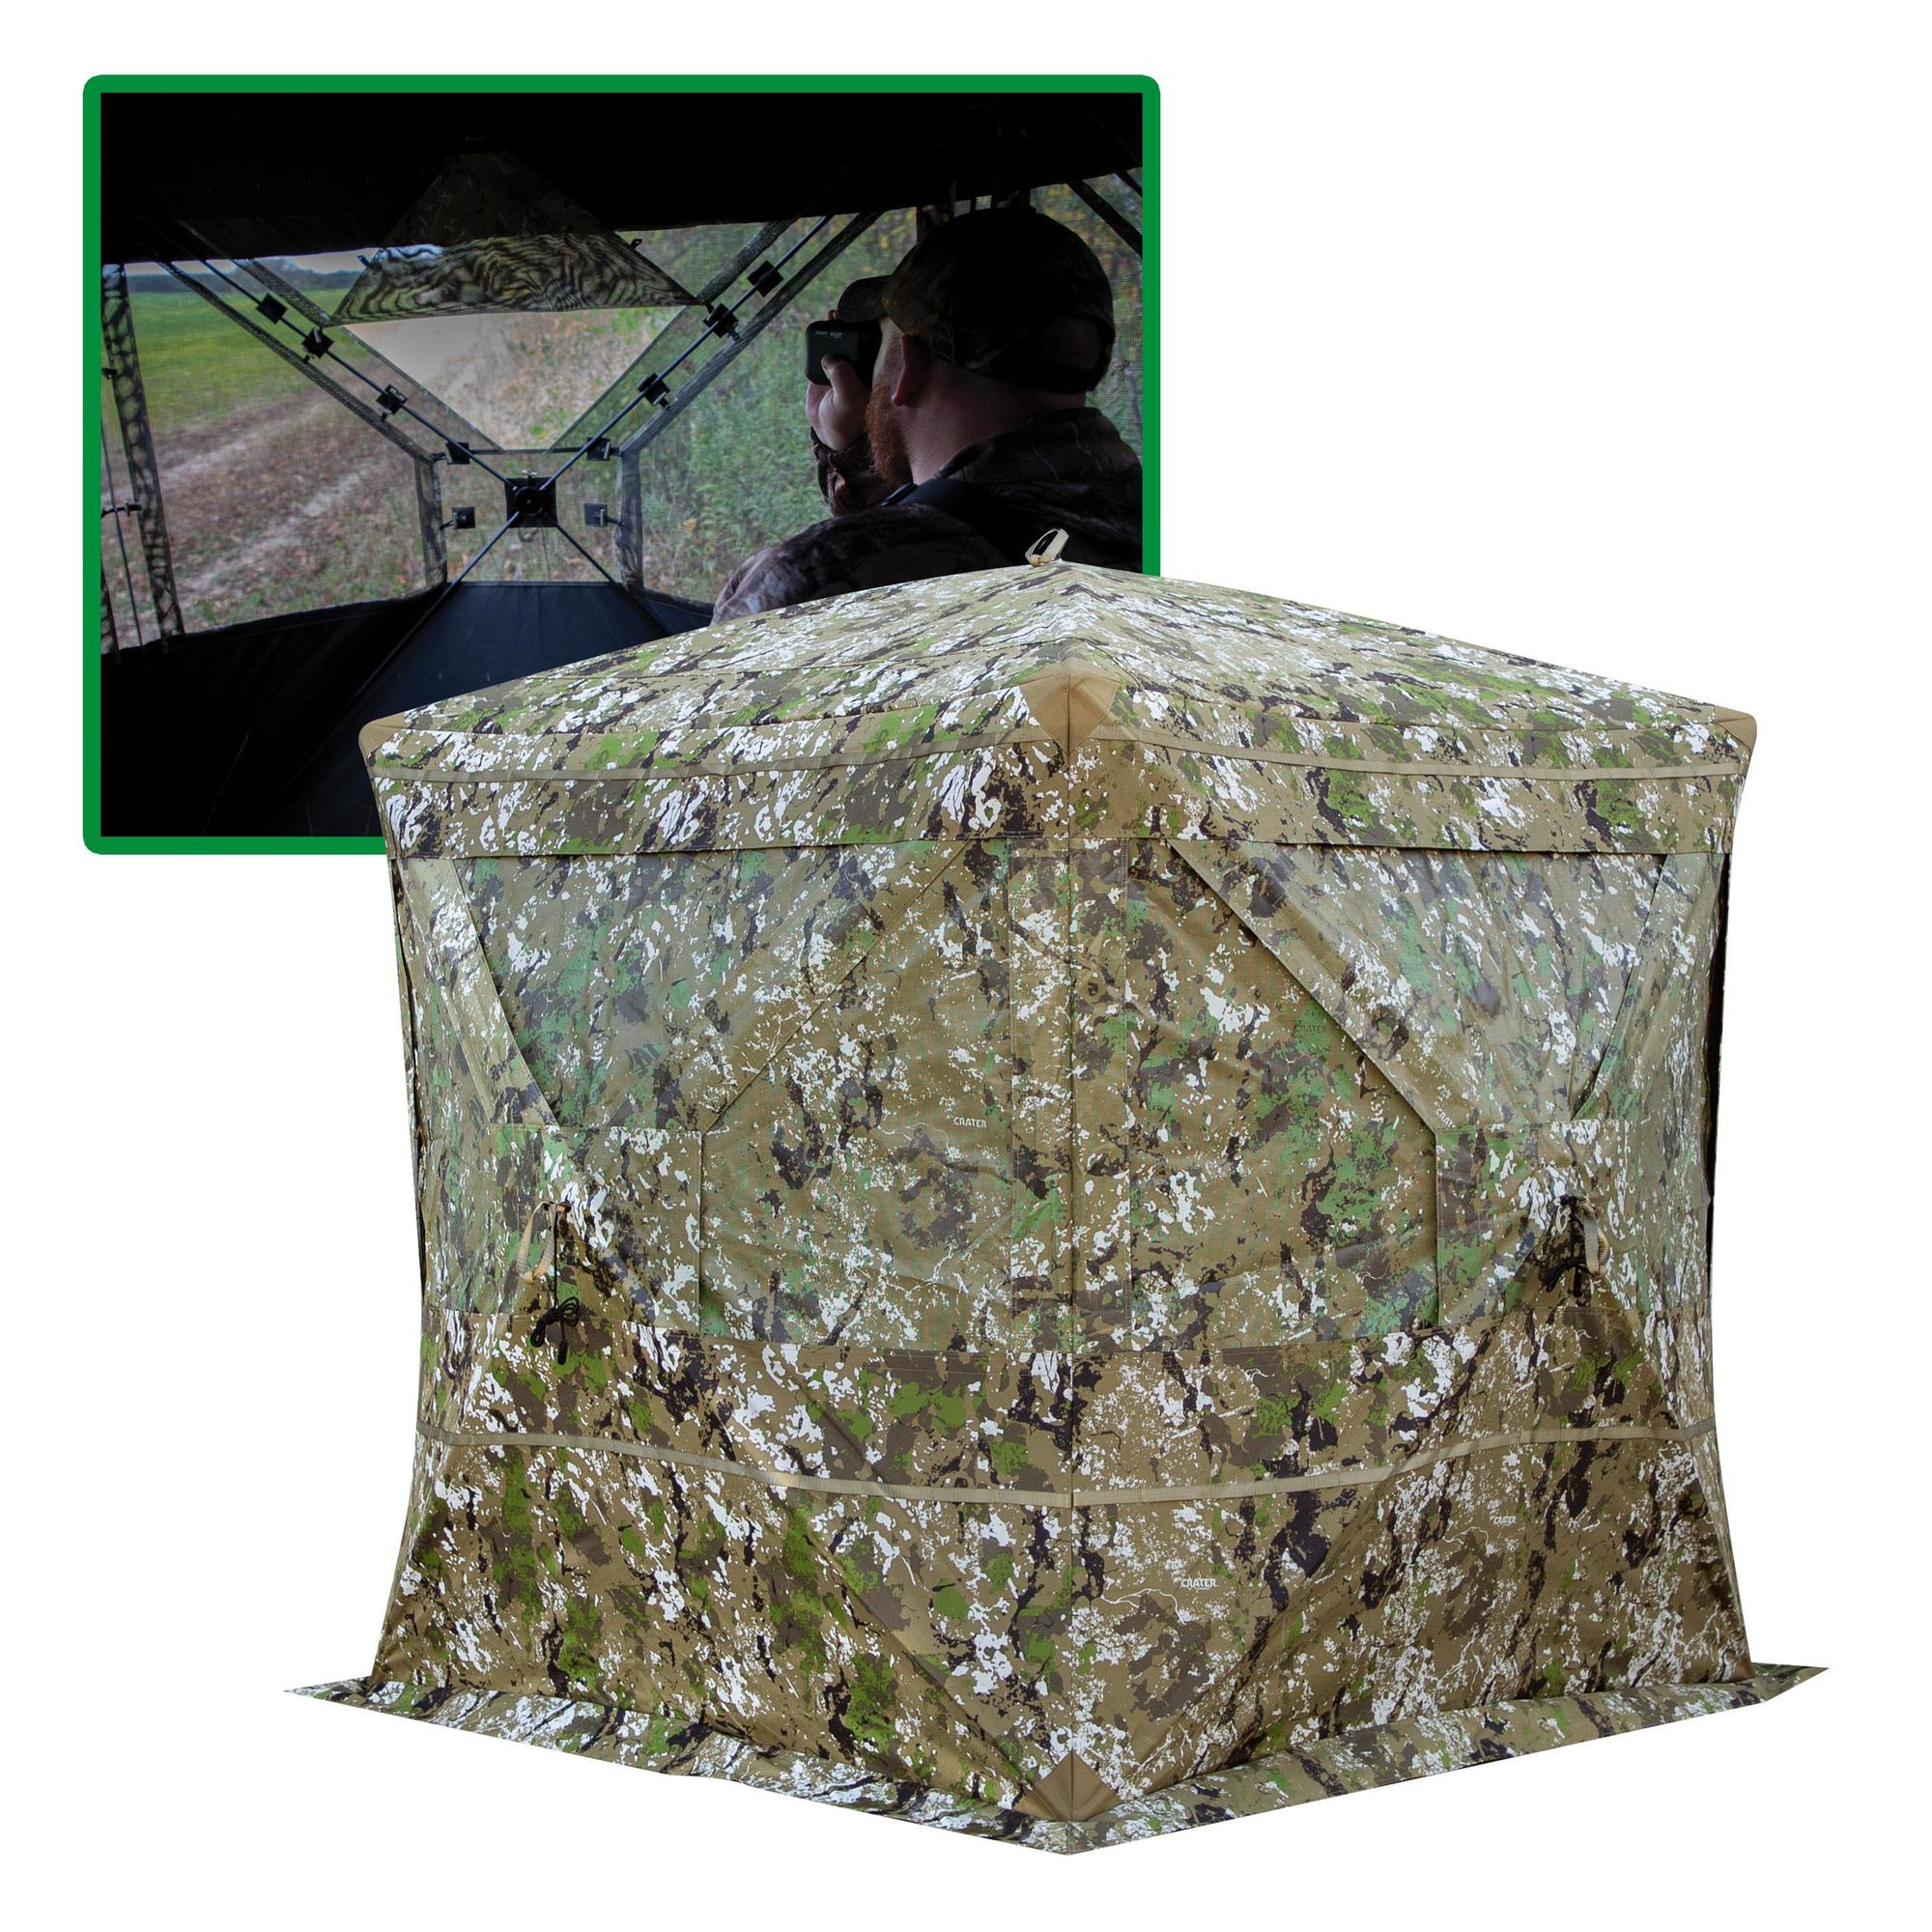 Barronett Blinds, FourSight Hunting Hub Blind, 3-Person Capacity, Color Camouflage, Material Polyester, Model FRS400CT